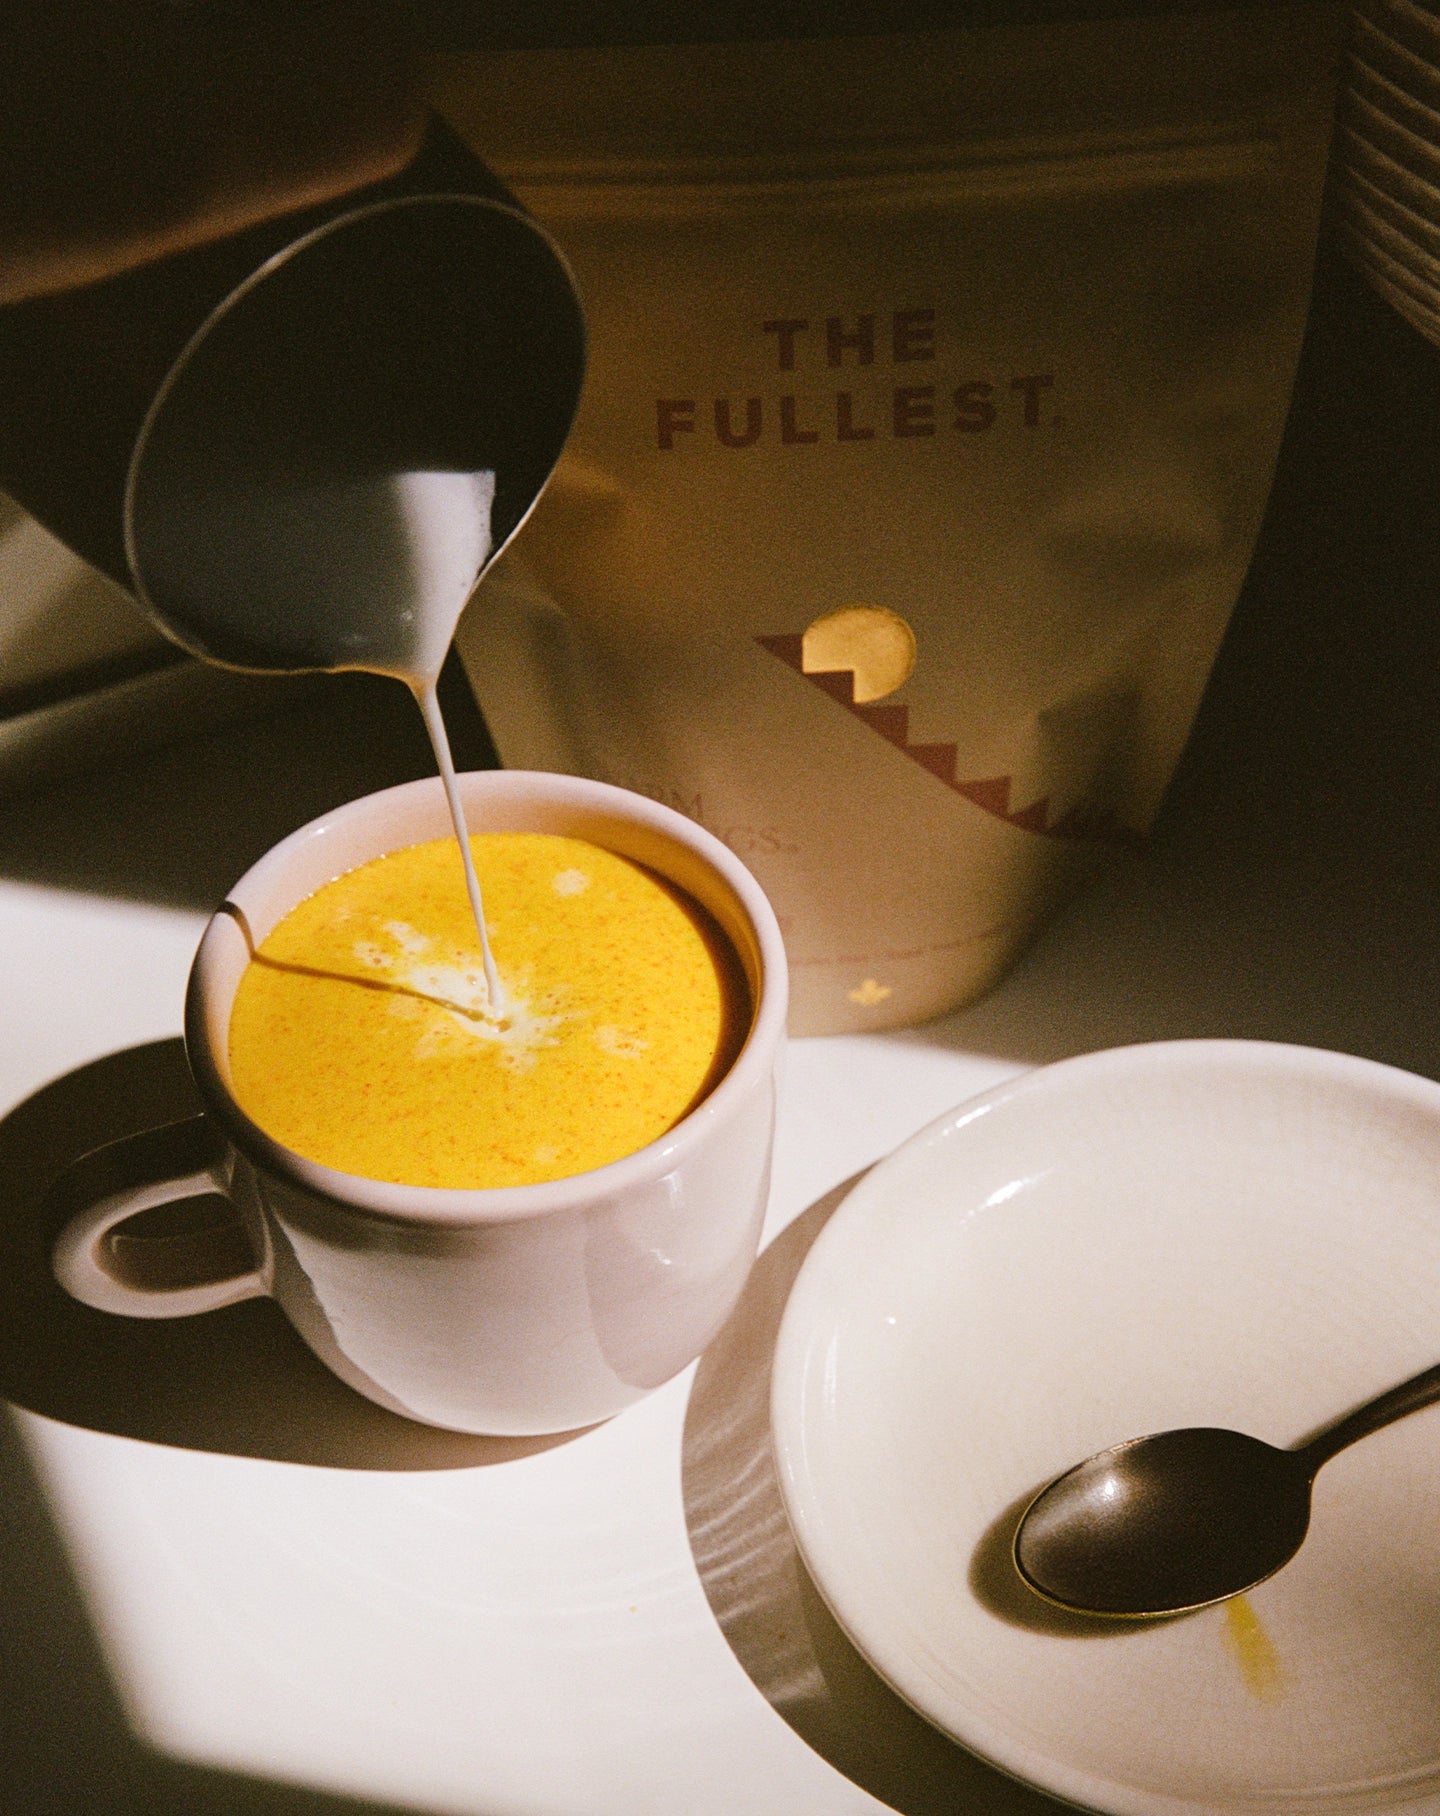 A white mug filled to the brim with a vibrant, saffron-colored frothy drink, as a stream of milk is being poured in, creating a delicate pattern on the surface. The mug sits next to a saucer.